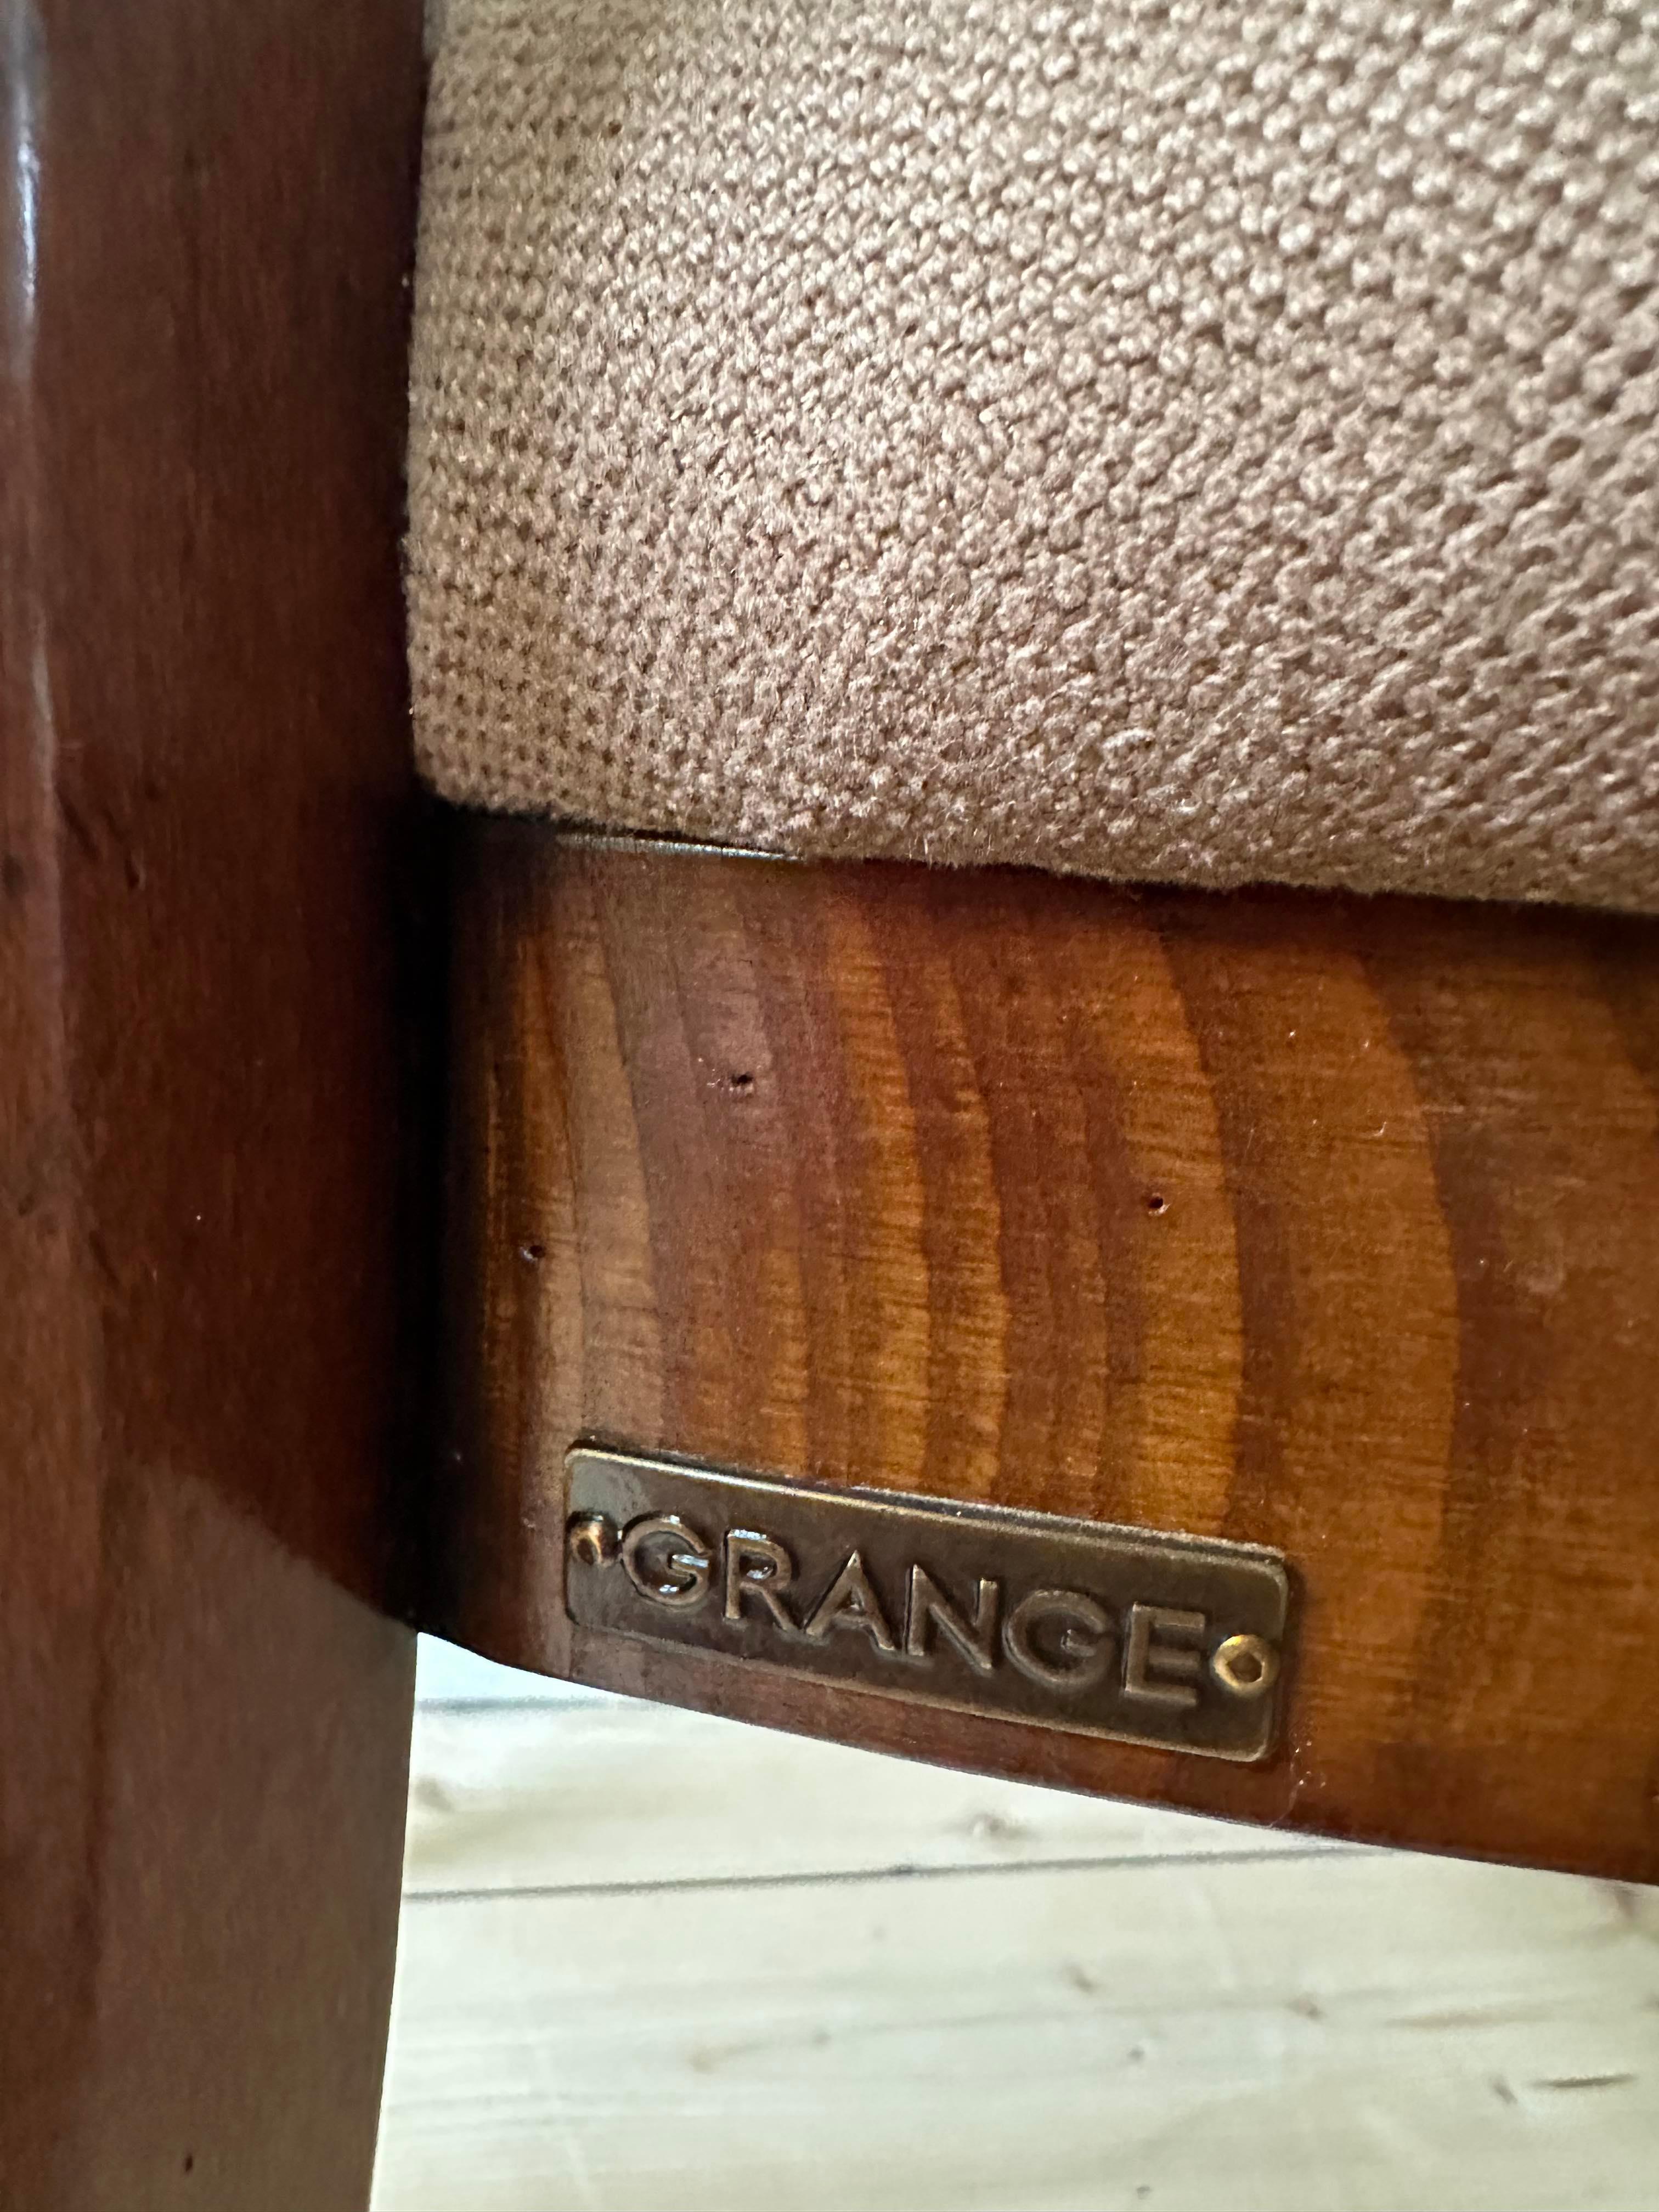 Textile 4 dining chairs from Grange